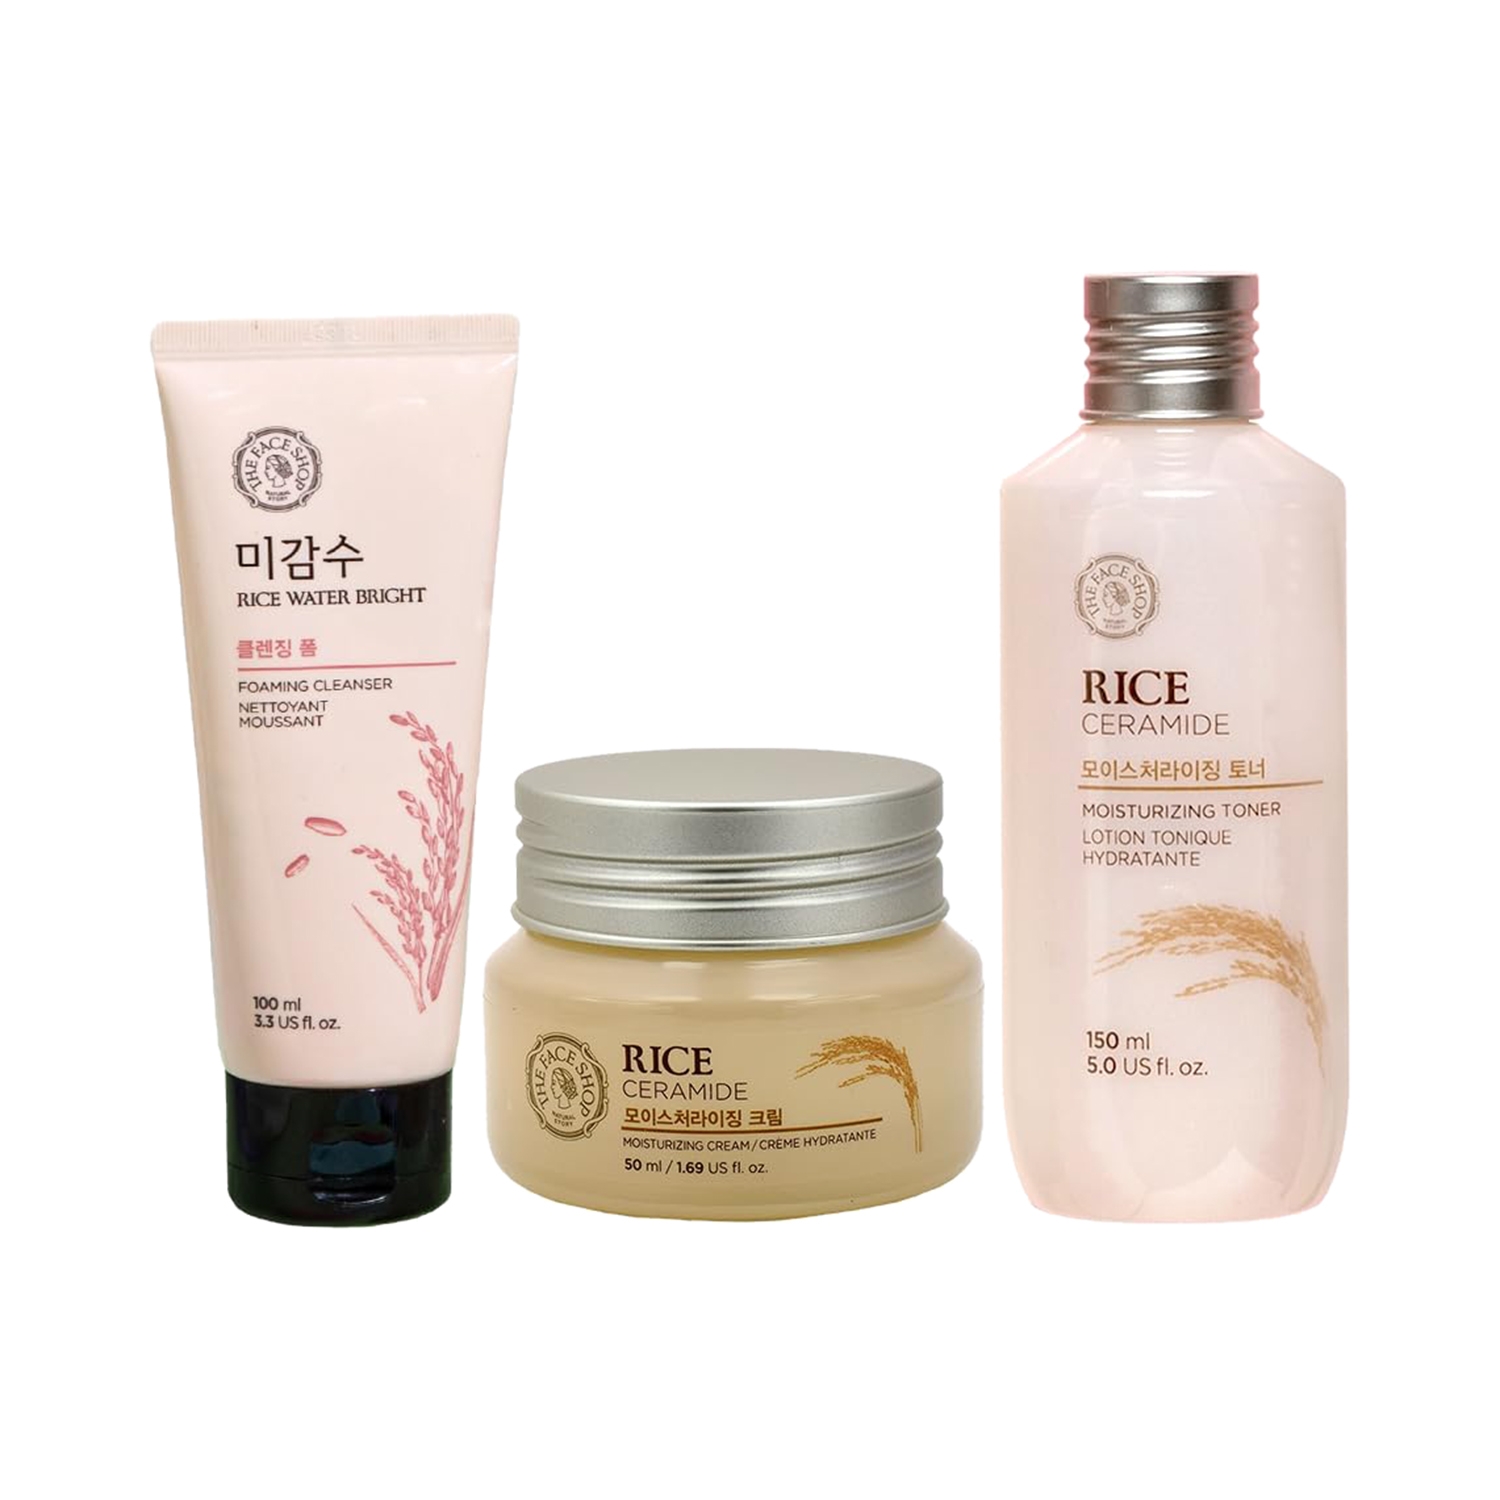 The Face Shop | The Face Shop Brightening Combo for Dry Skin